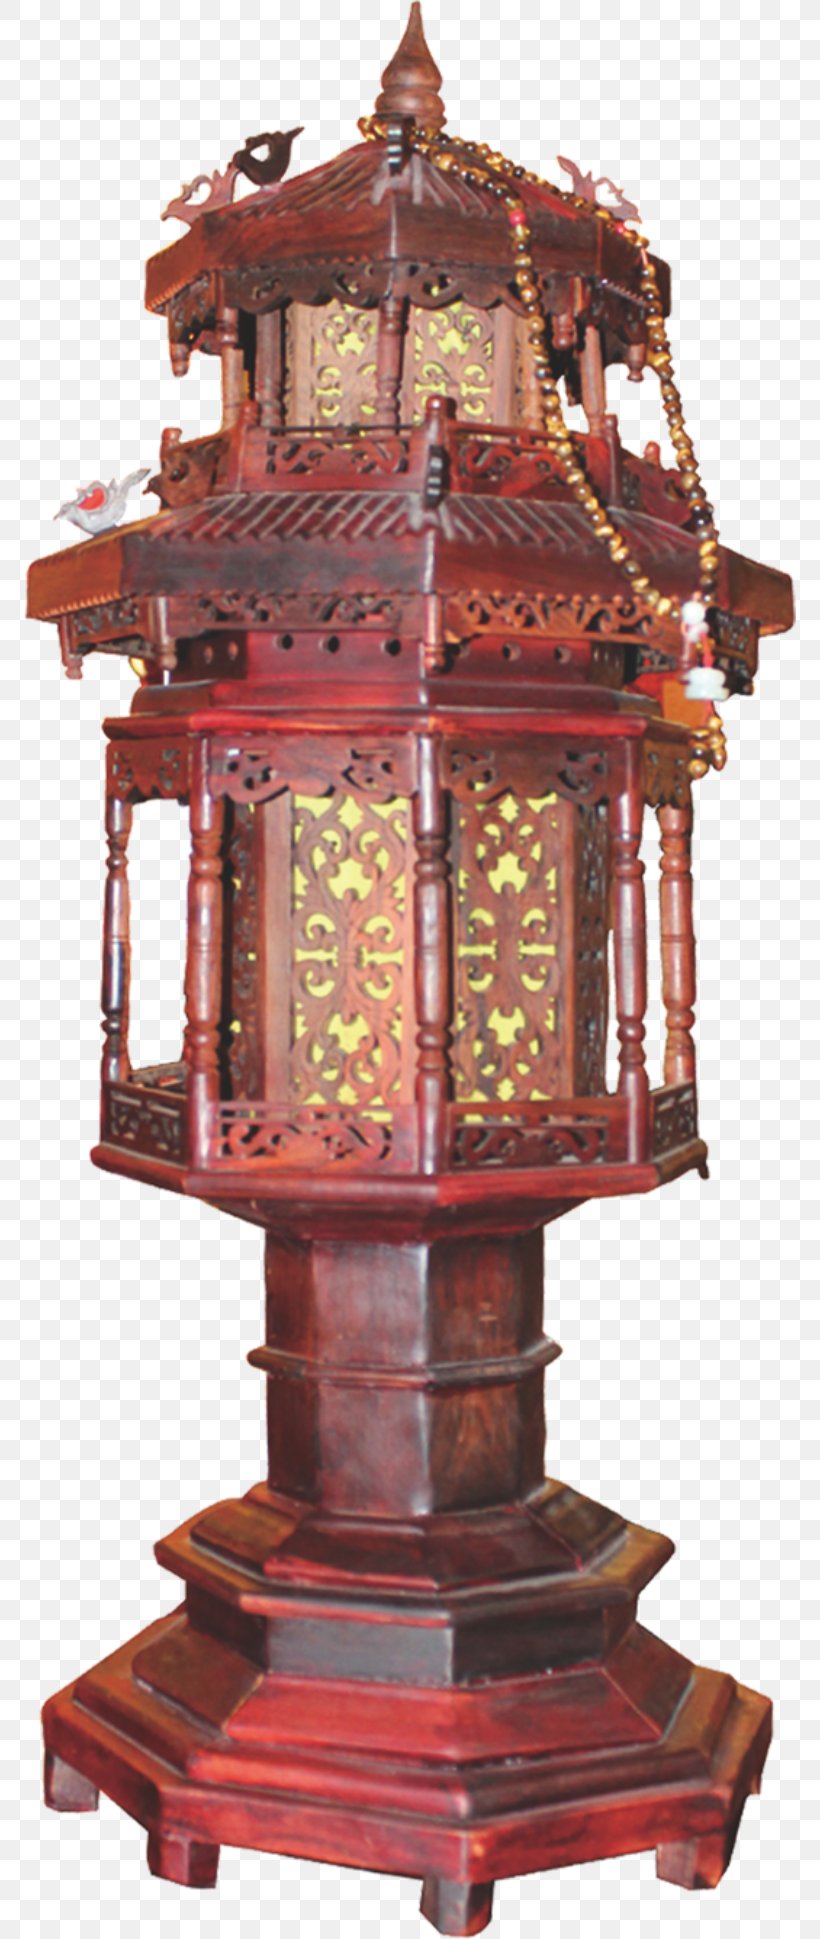 Lamp Download Computer File, PNG, 772x1939px, Lamp, Architecture, Chinese Architecture, Google Images, Paper Lantern Download Free